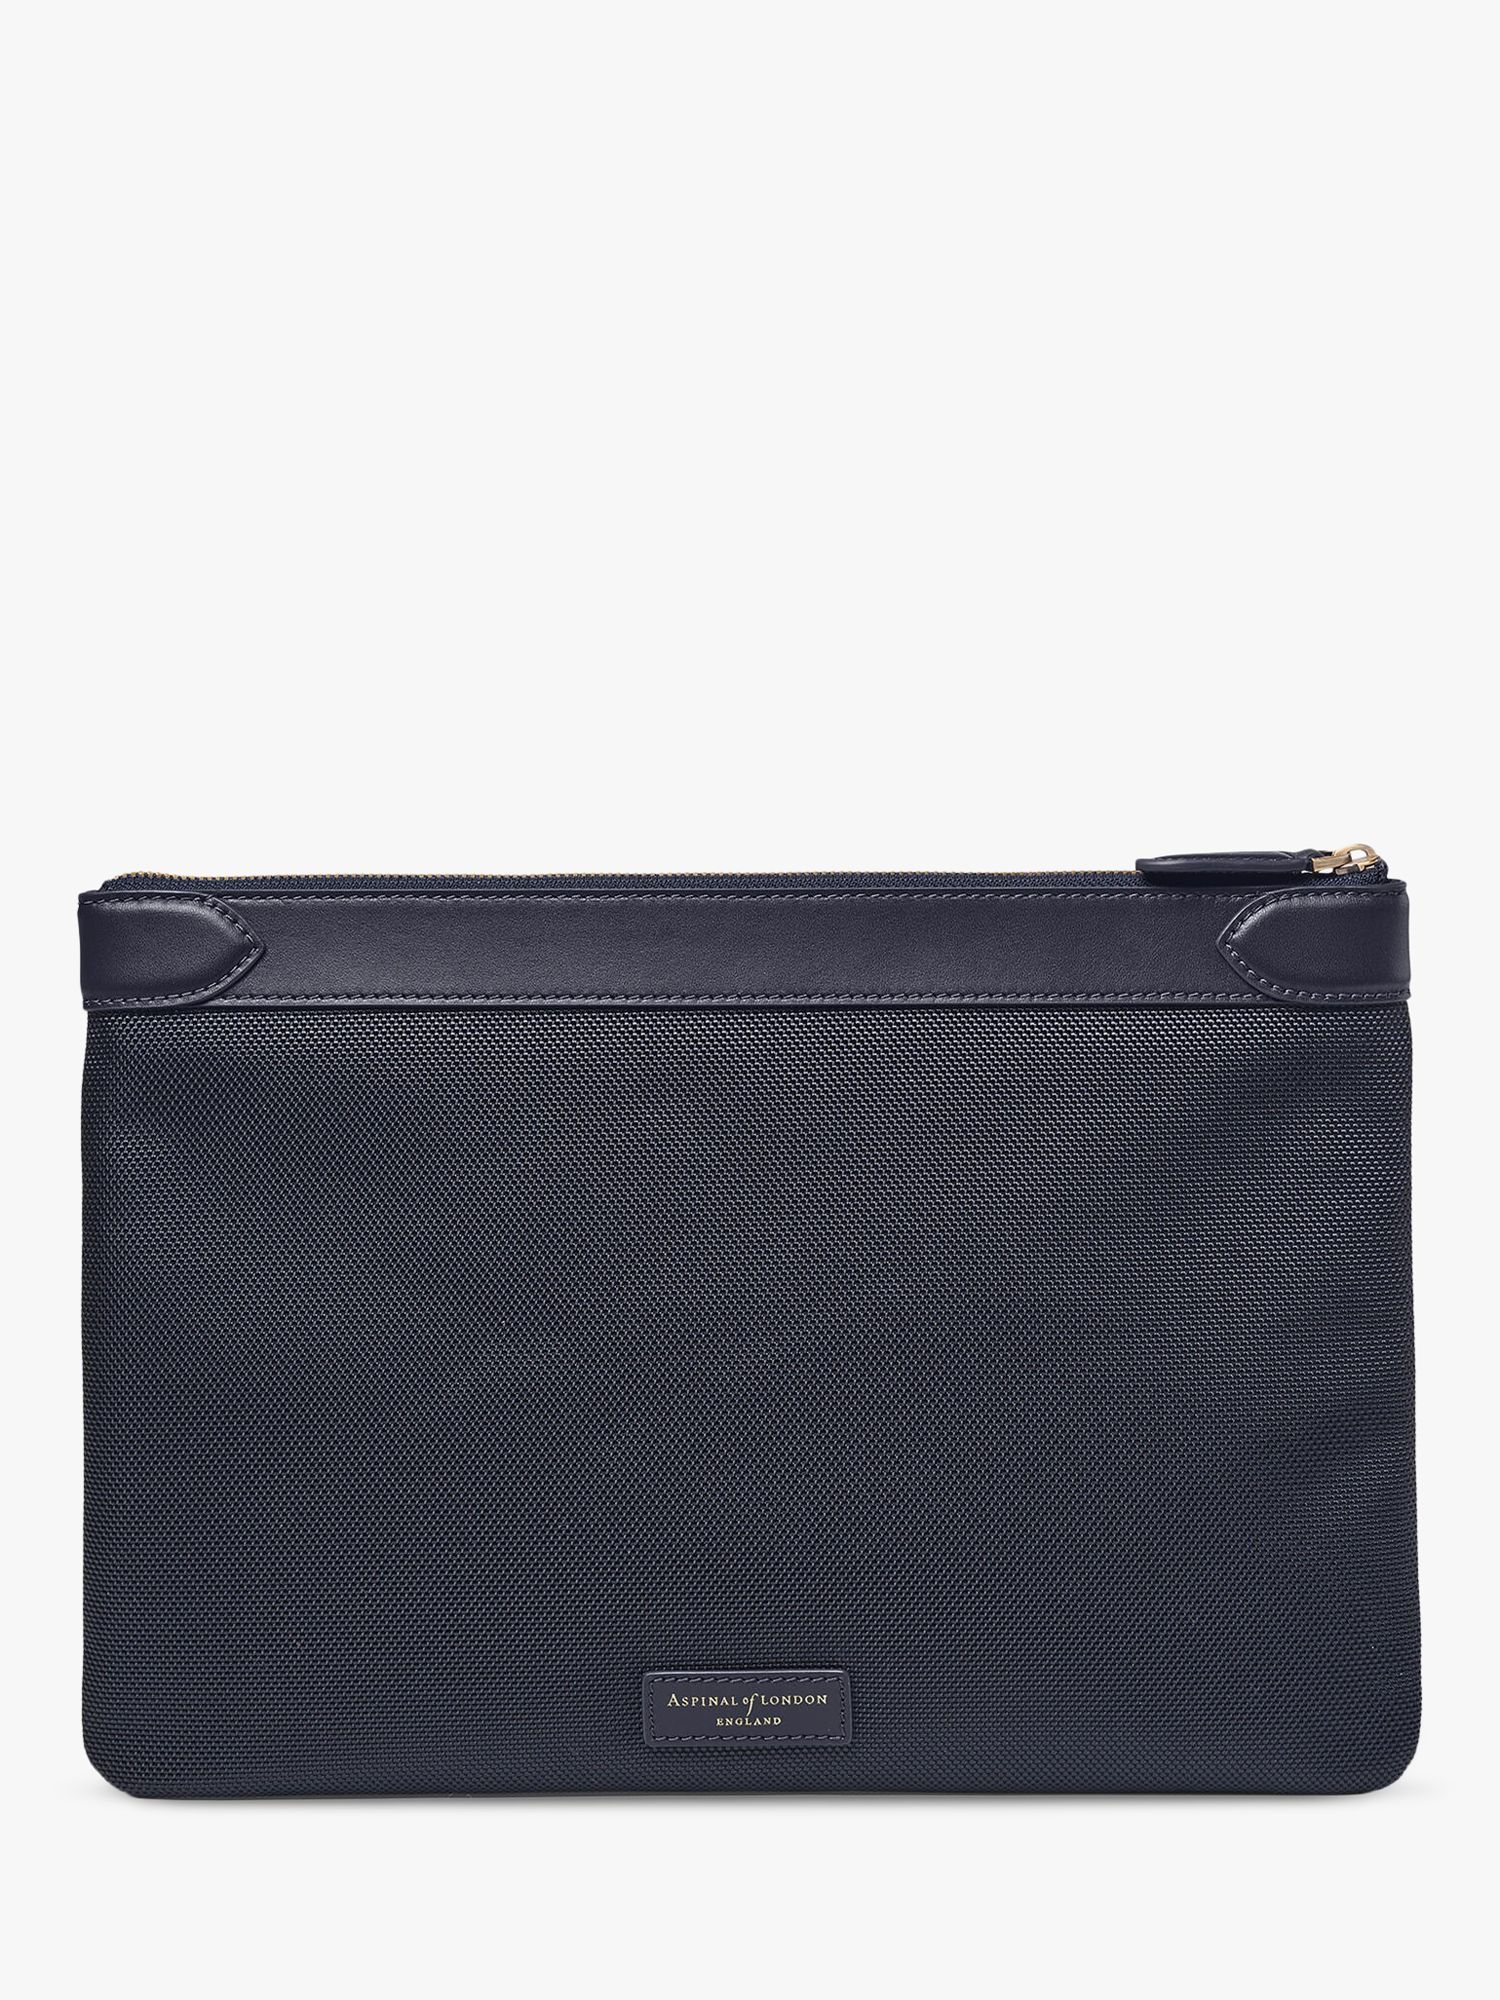 Aspinal of London Nylon Pouch at John Lewis & Partners